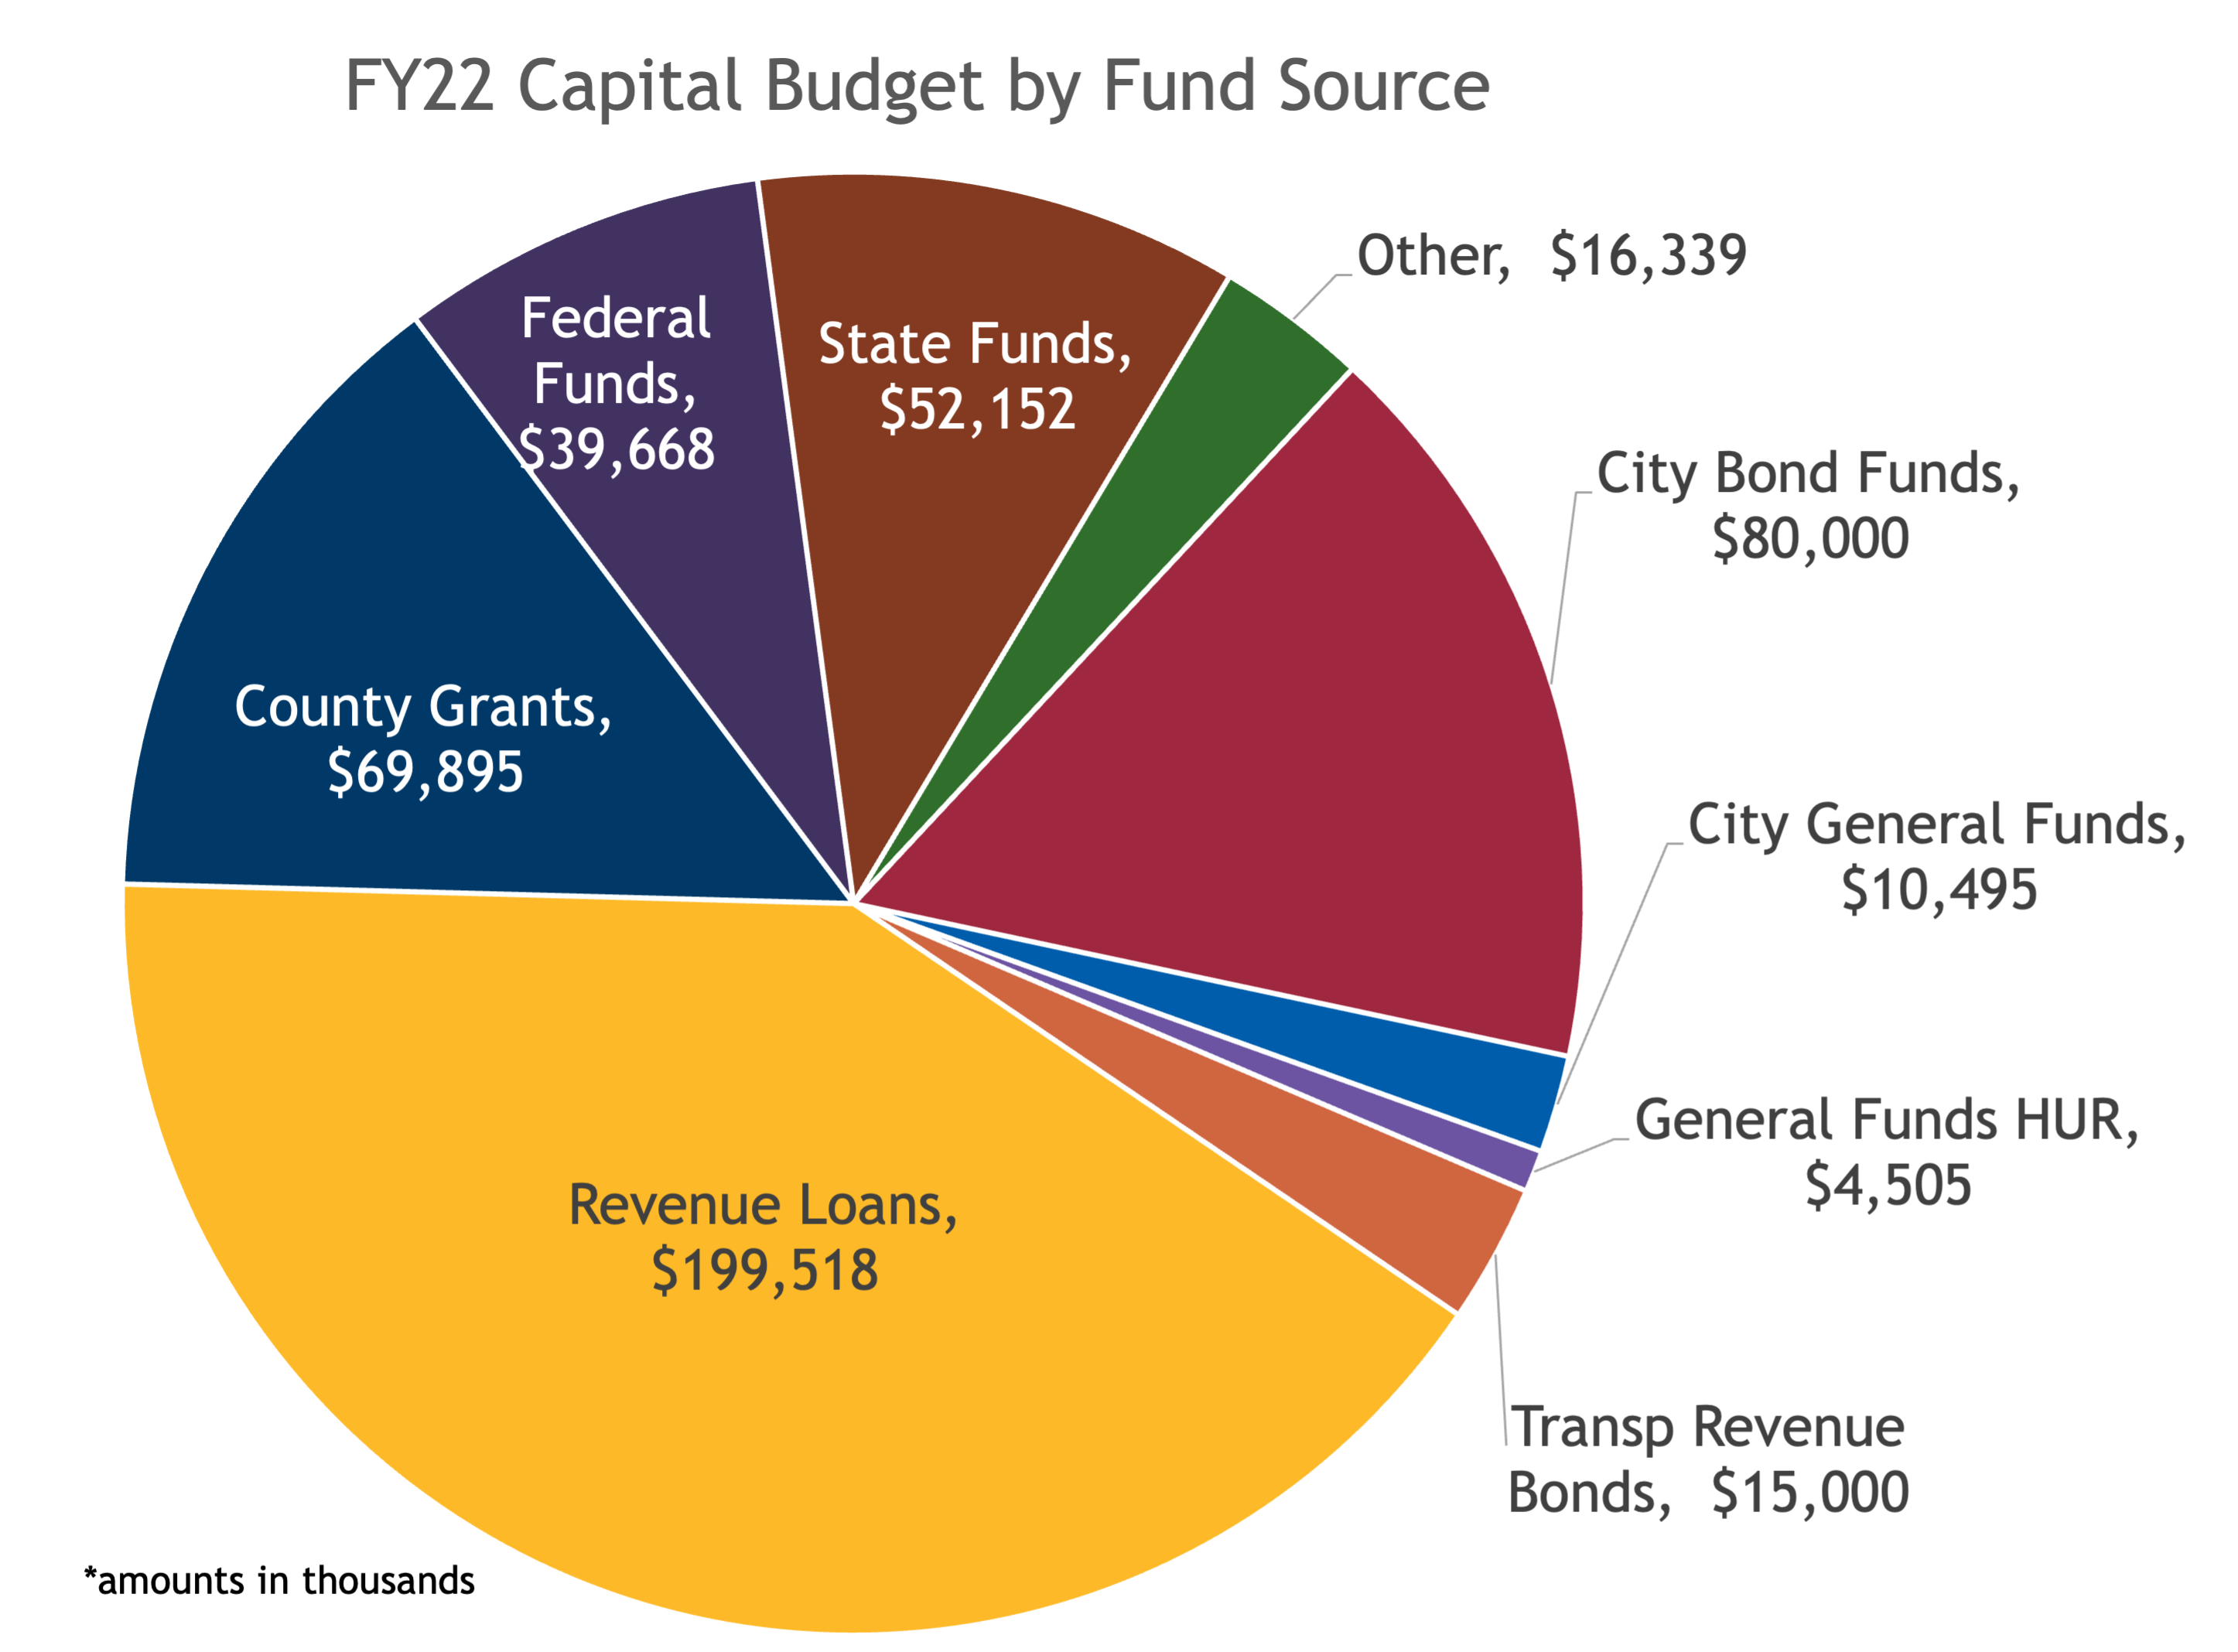 The FY22 capital budget is made up of a variety of fund sources.